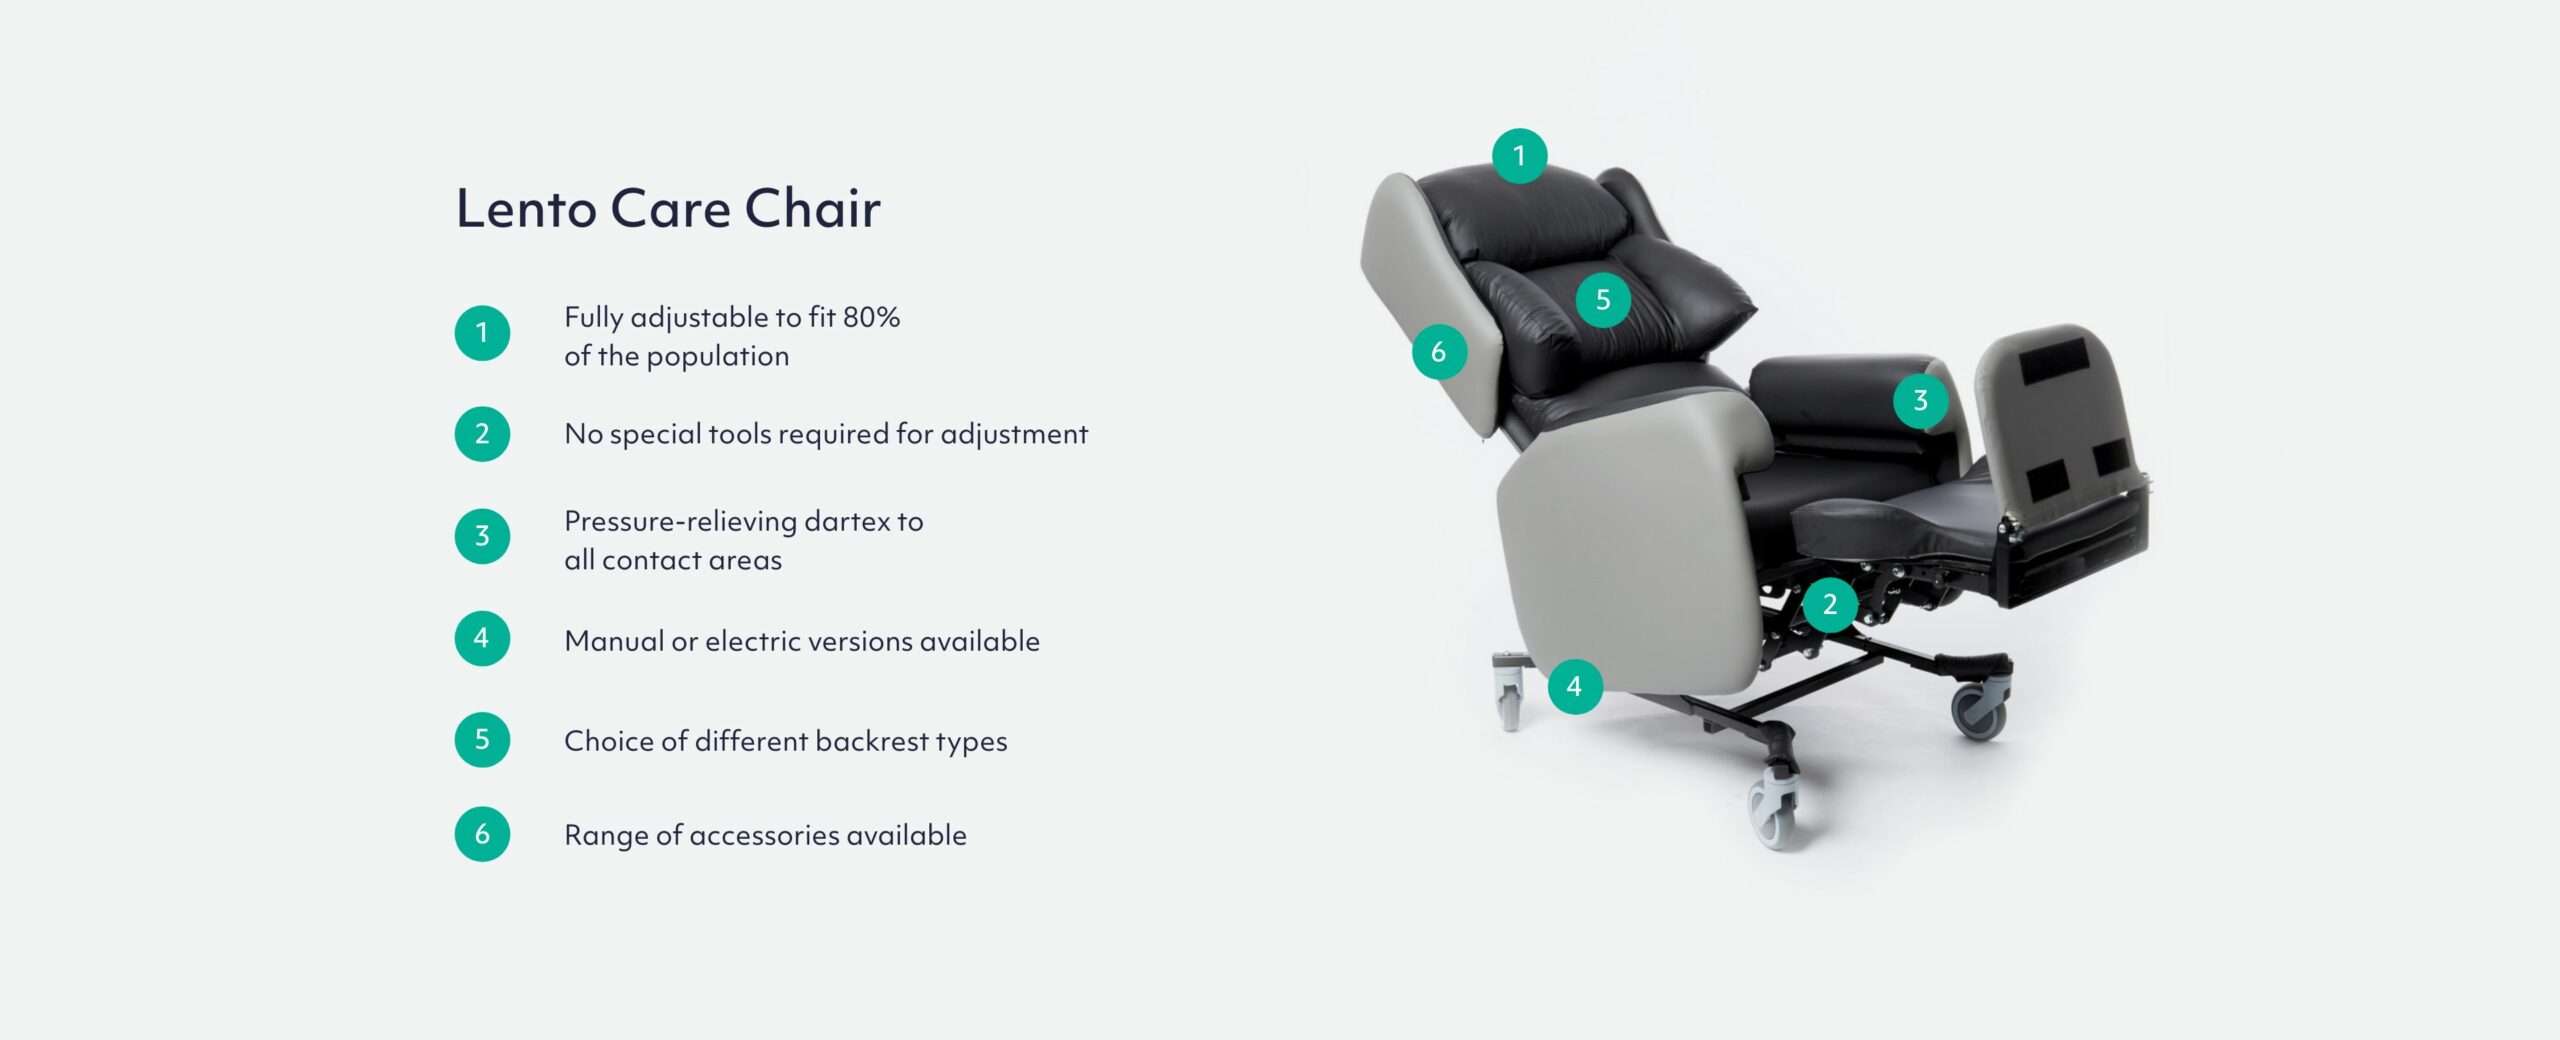 Labelled picture of the Lento Care Chair in a recline position with leg-rest extended. Labelled to show tool-less adjustability, pressure care features, manual & electric versions available, choice of backrest types and accessory range.